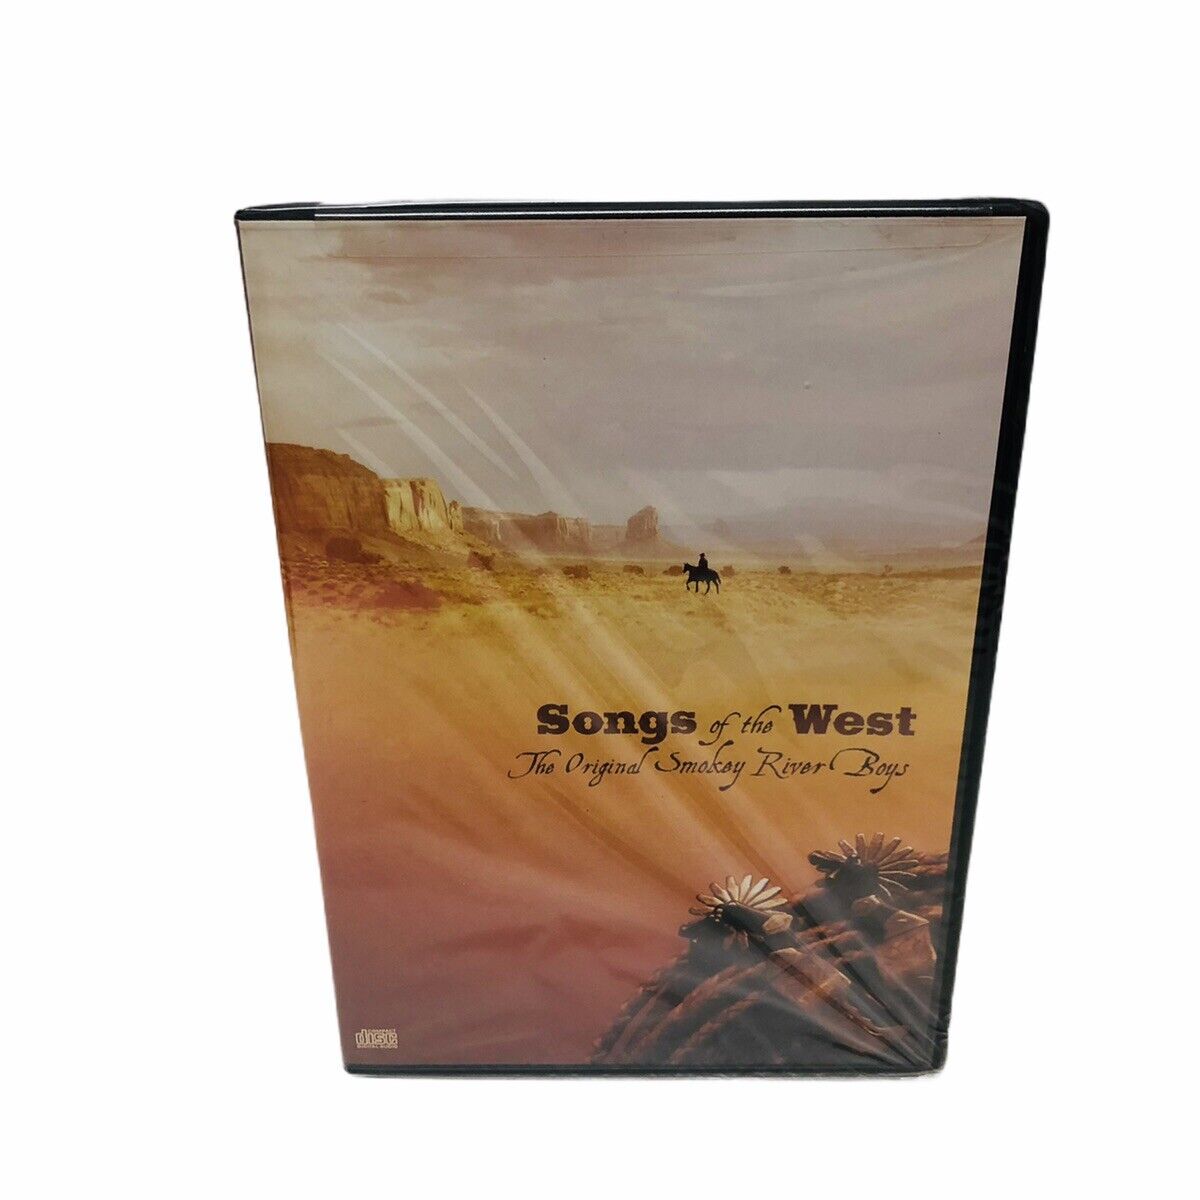 Songs Of The West The Original Smokey River Boys CD (In a Sealed DVD Case) Bin I